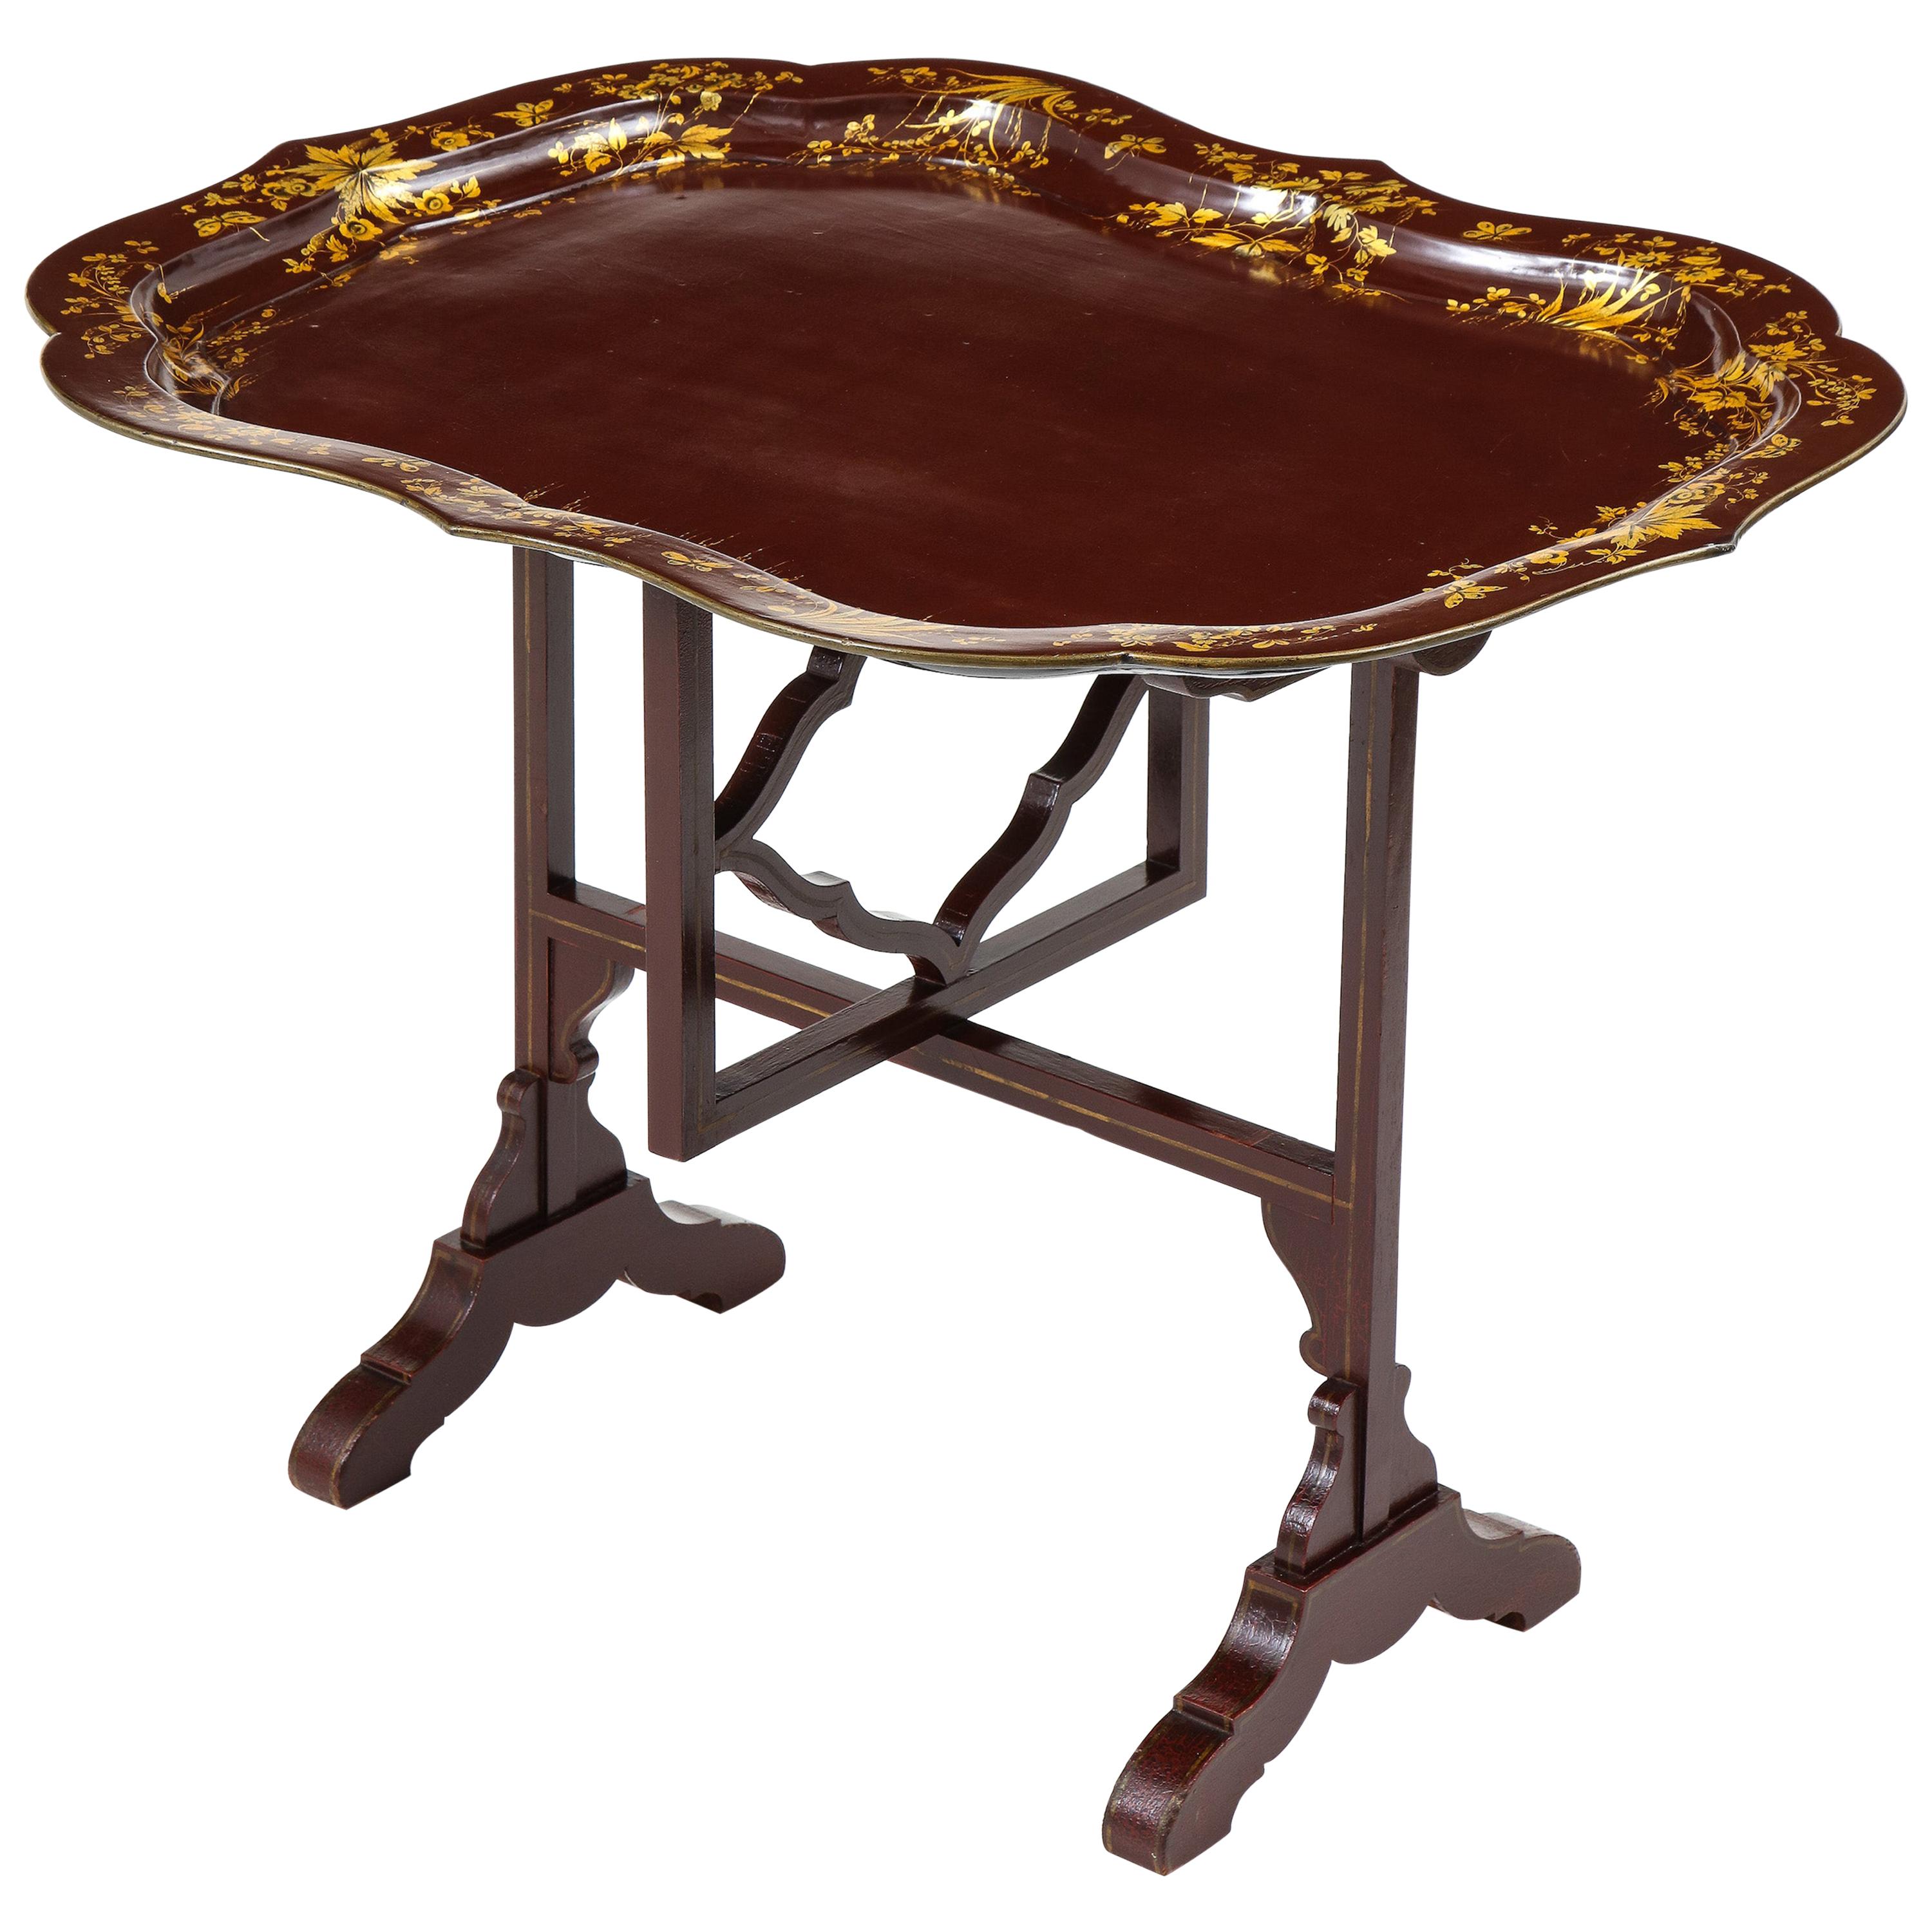 Regency Aubergine Lacquer Tray Table